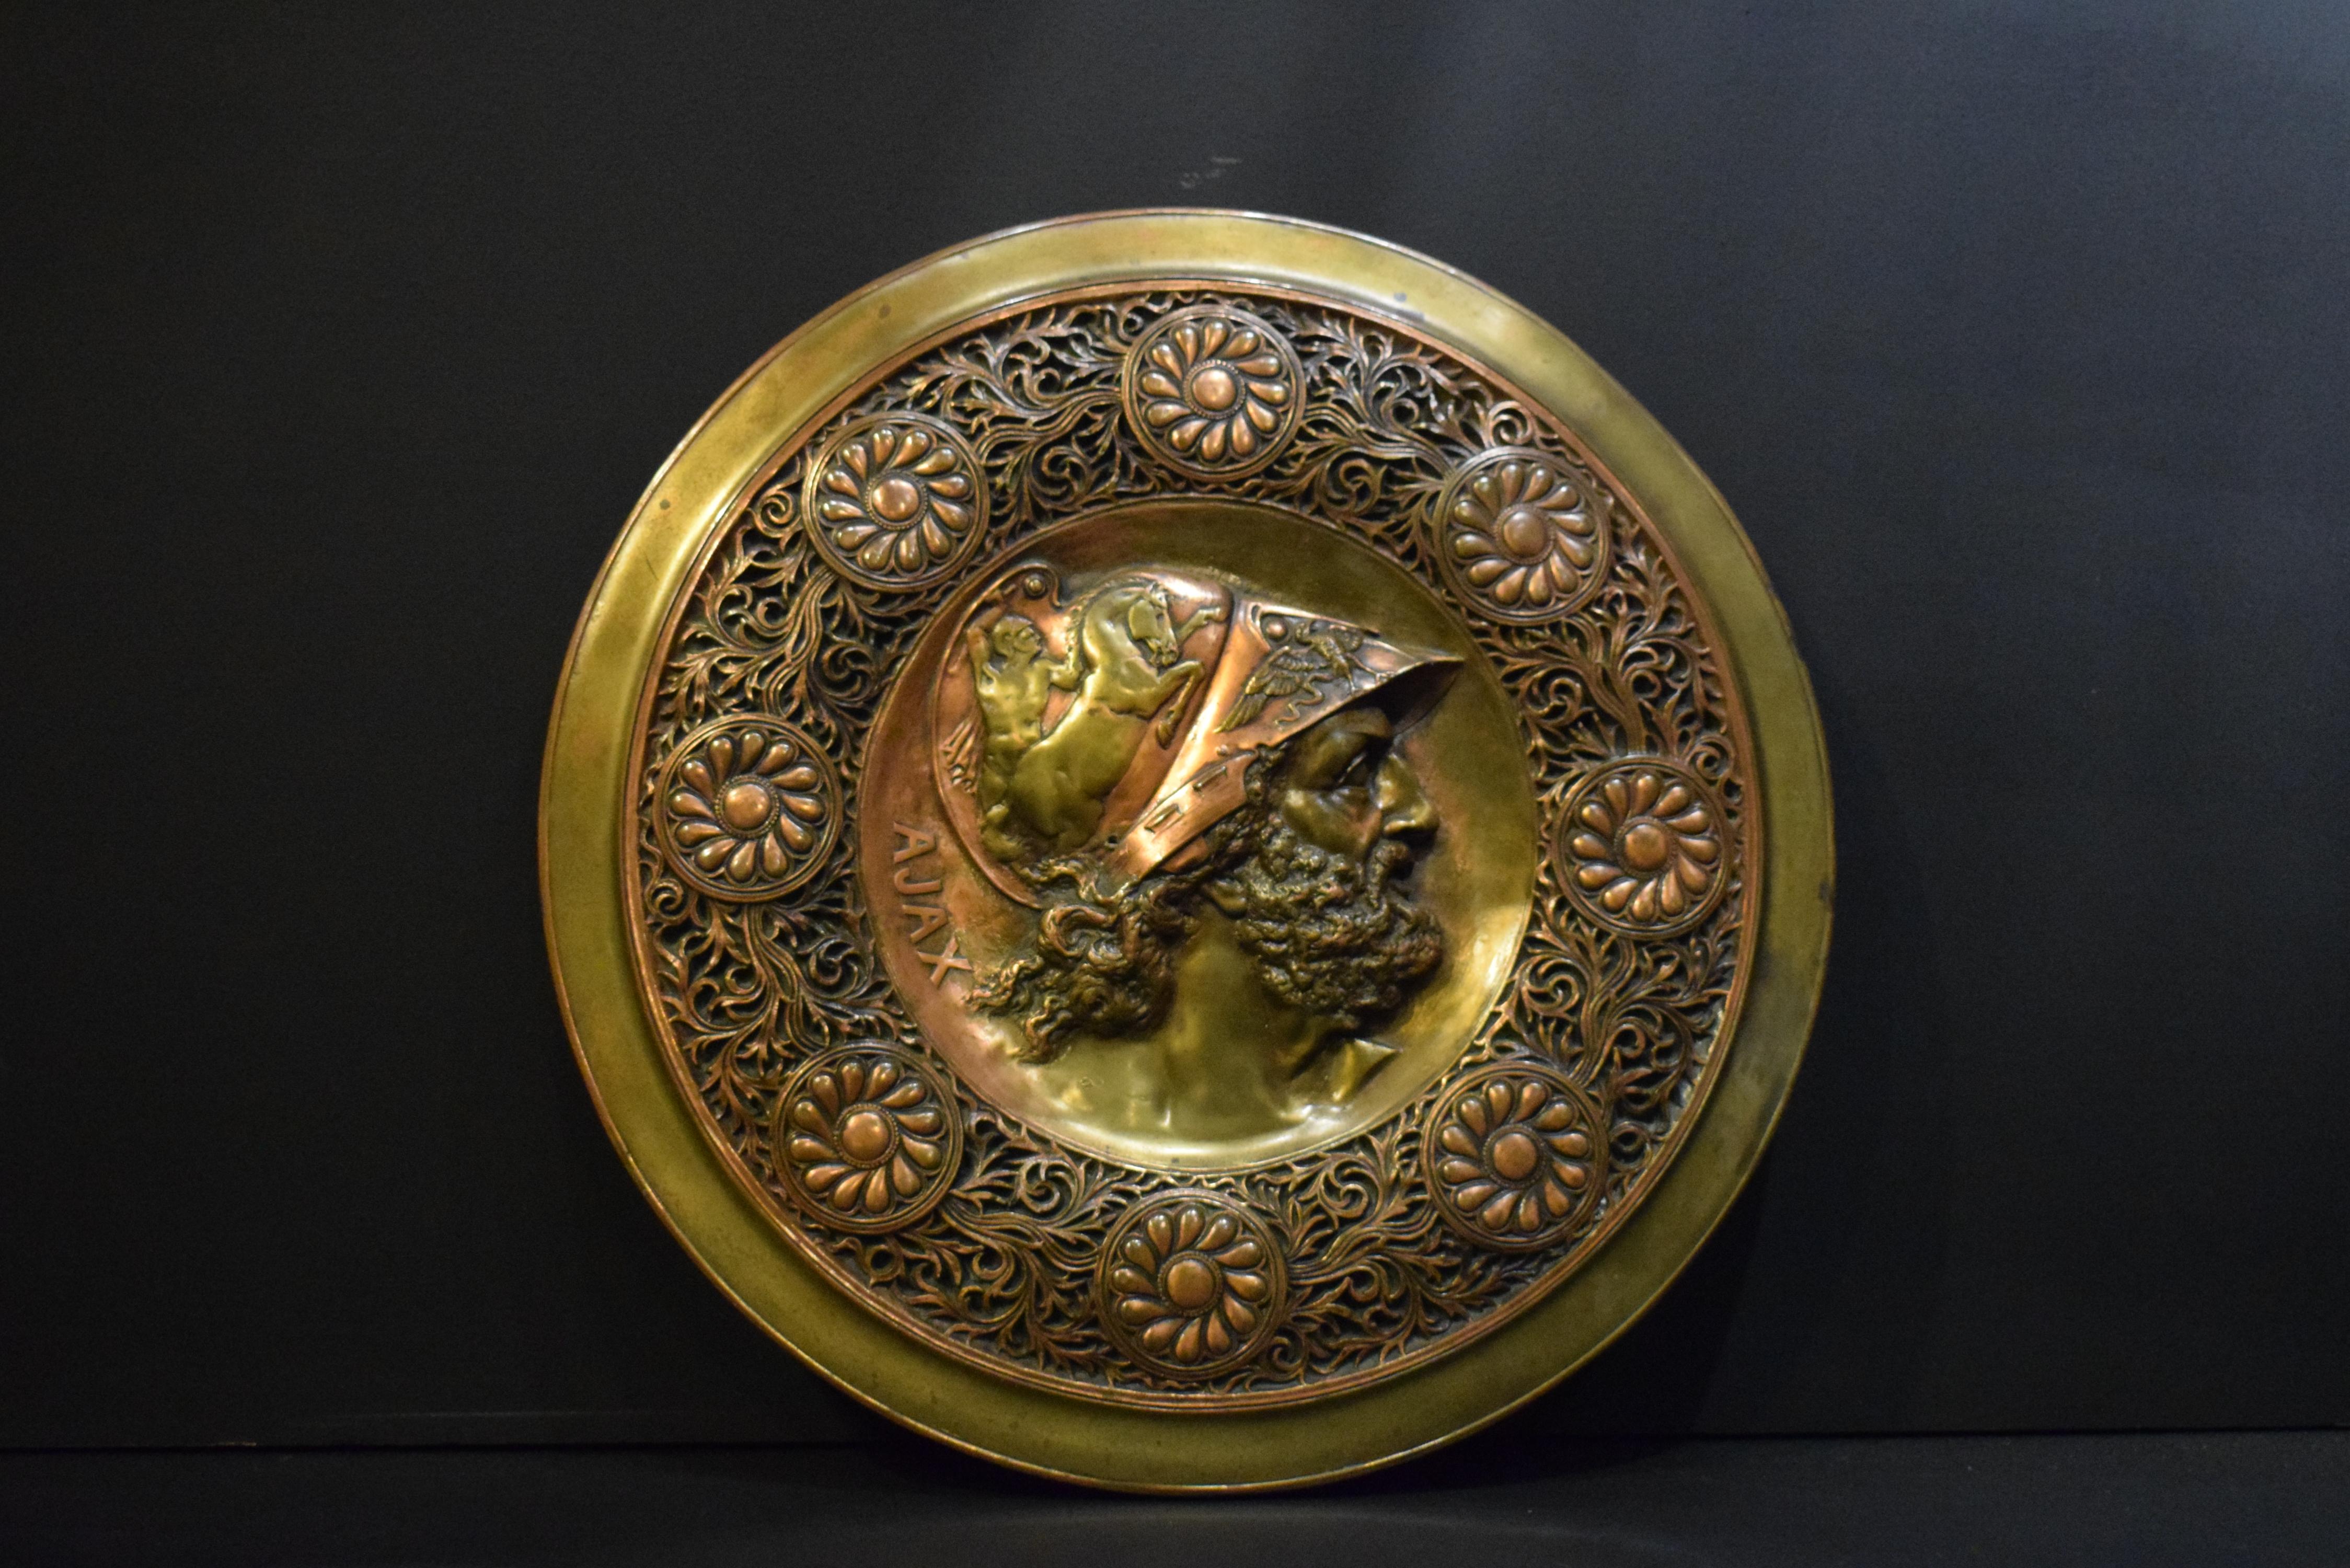 A superb gilt bronze plaque of great quality depicting the Greek warrior 